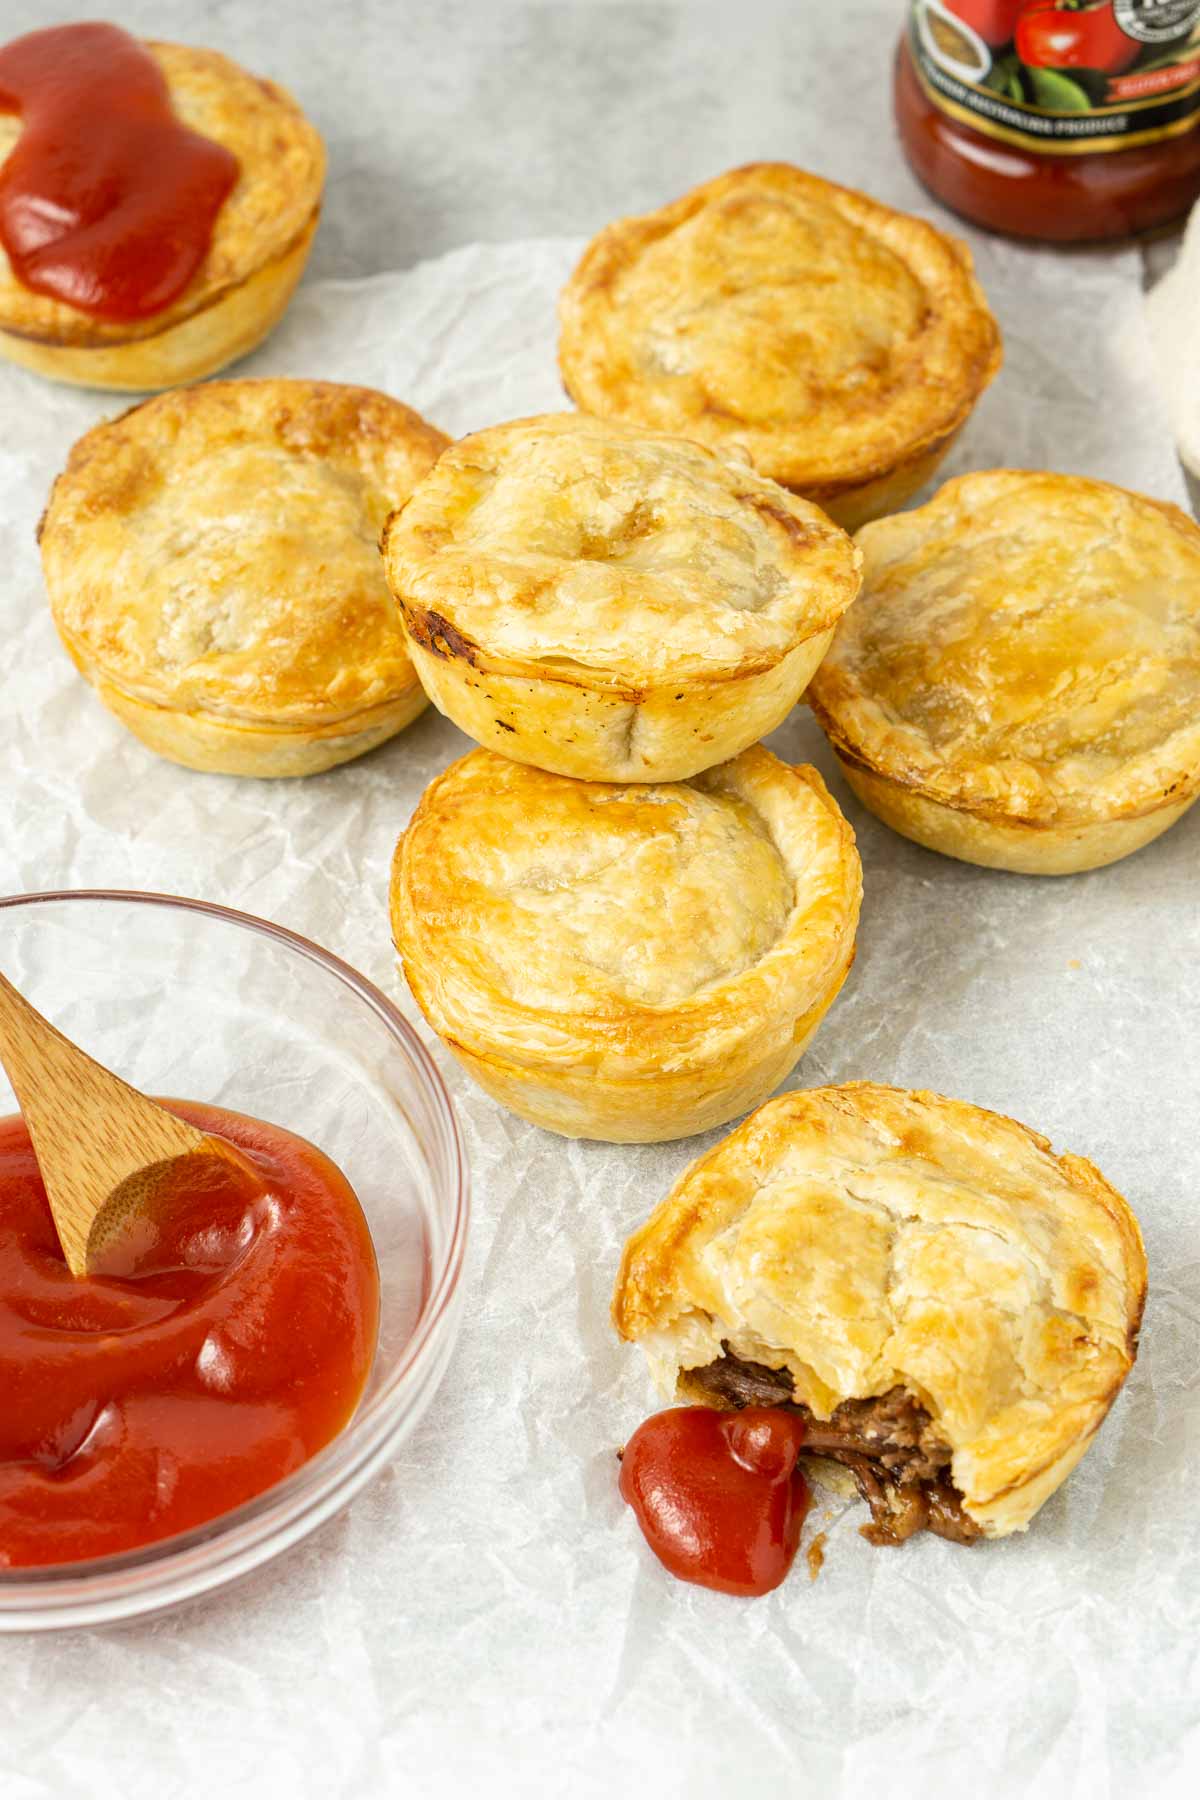 Mini beef pies laid out on baking paper with tomato sauce.